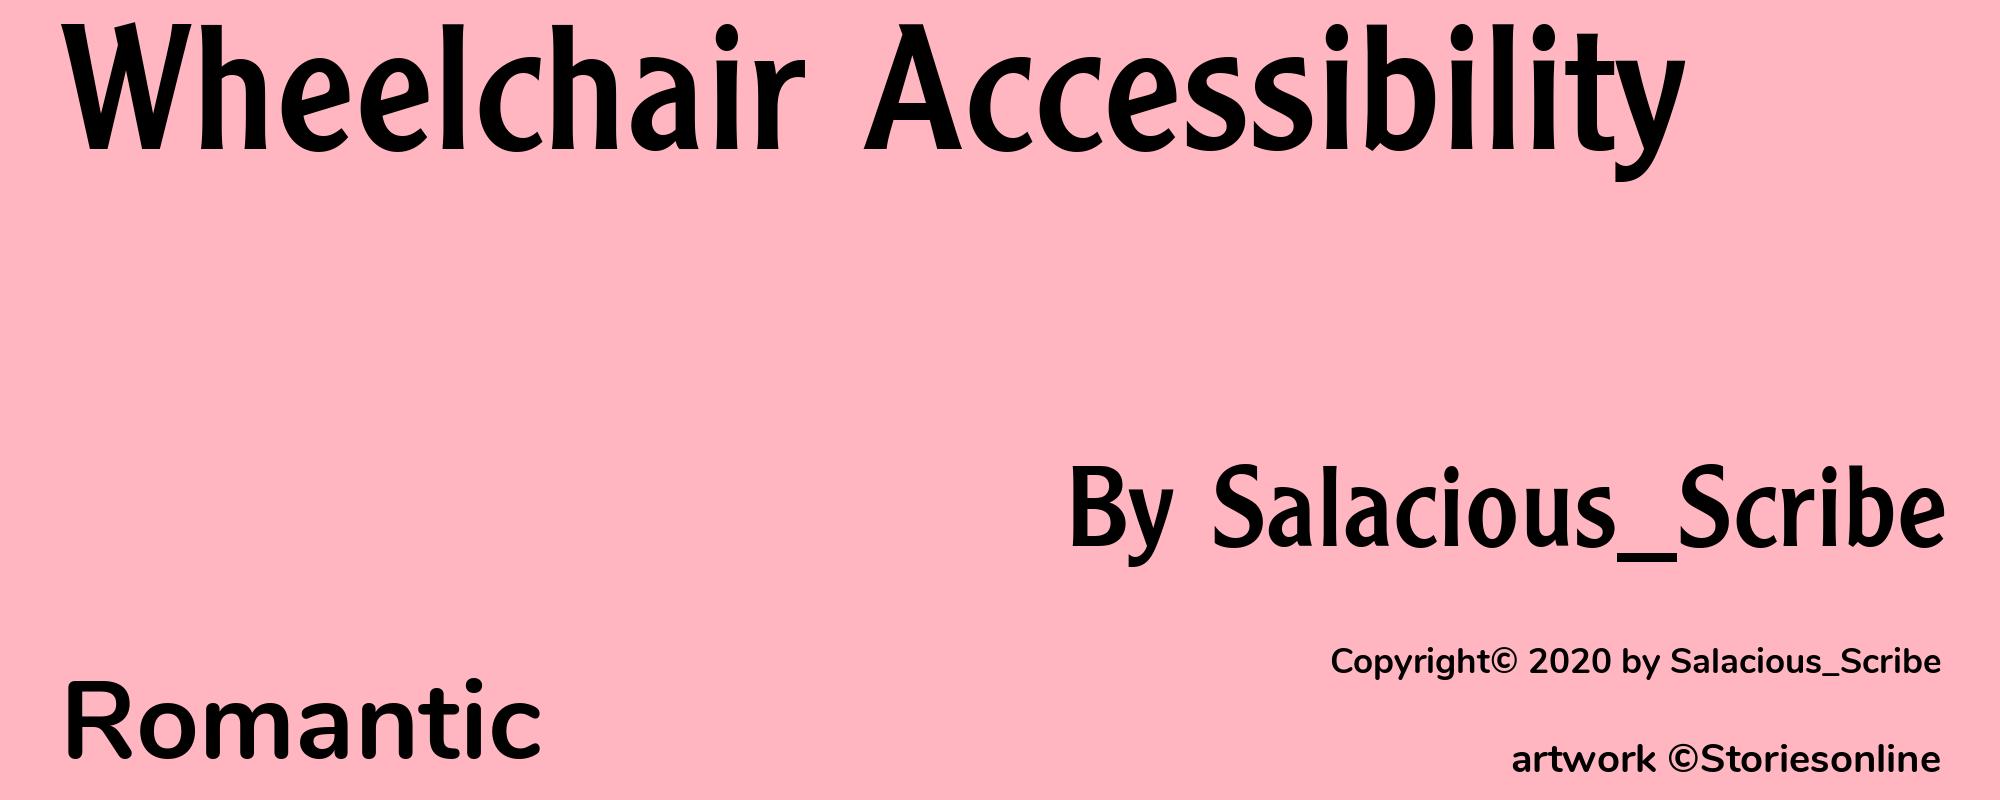 Wheelchair Accessibility - Cover